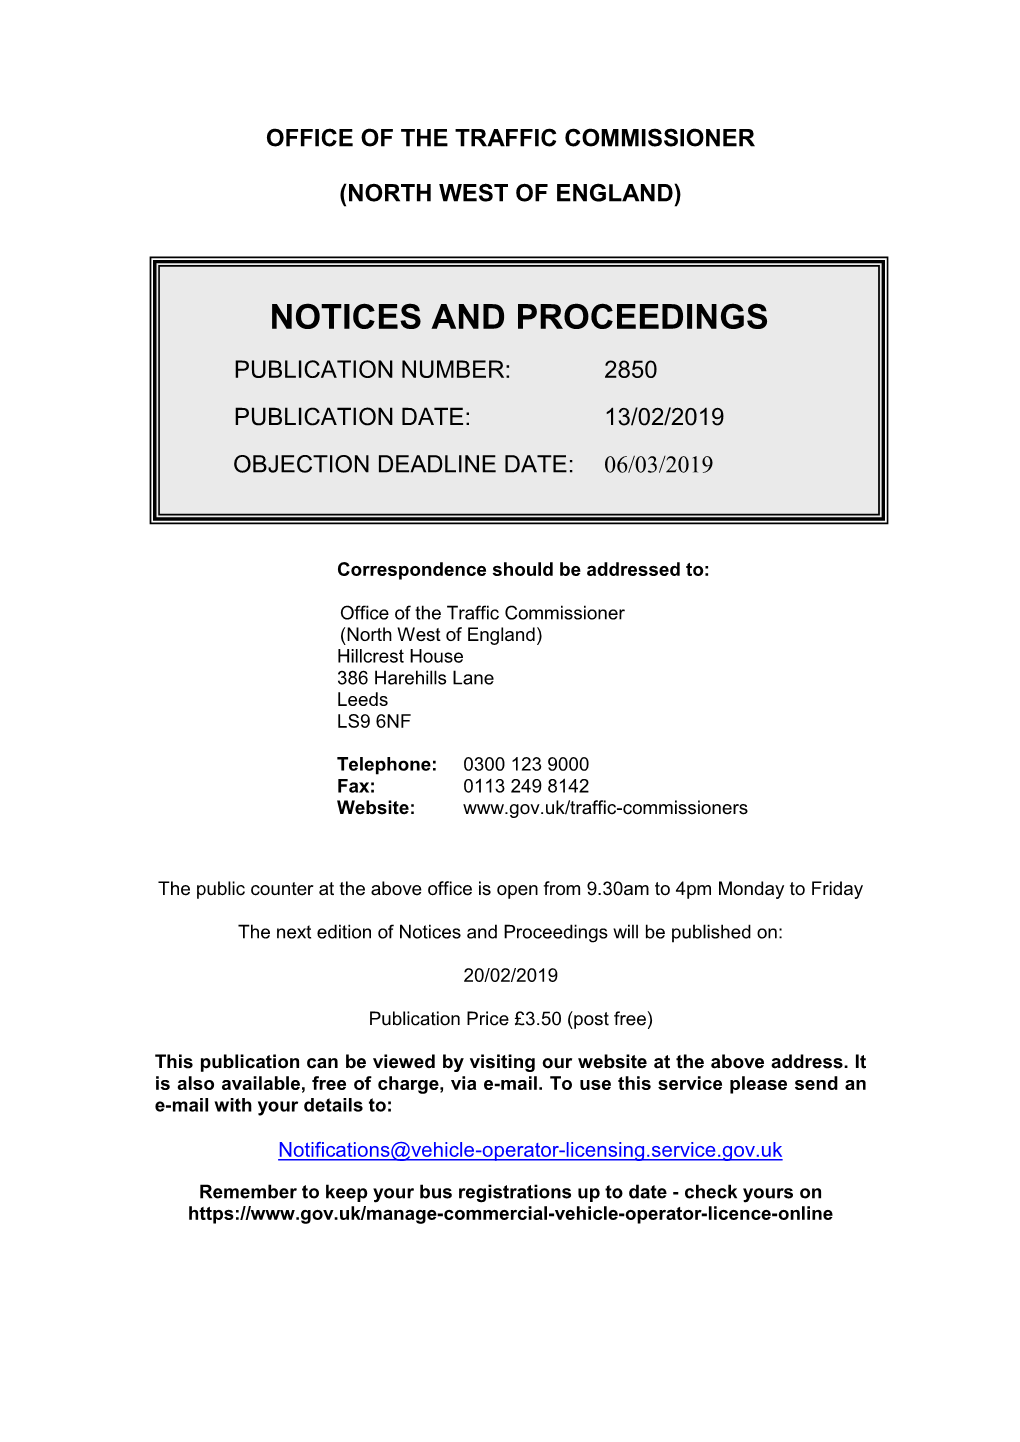 Notice and Proceedings for the North West of England